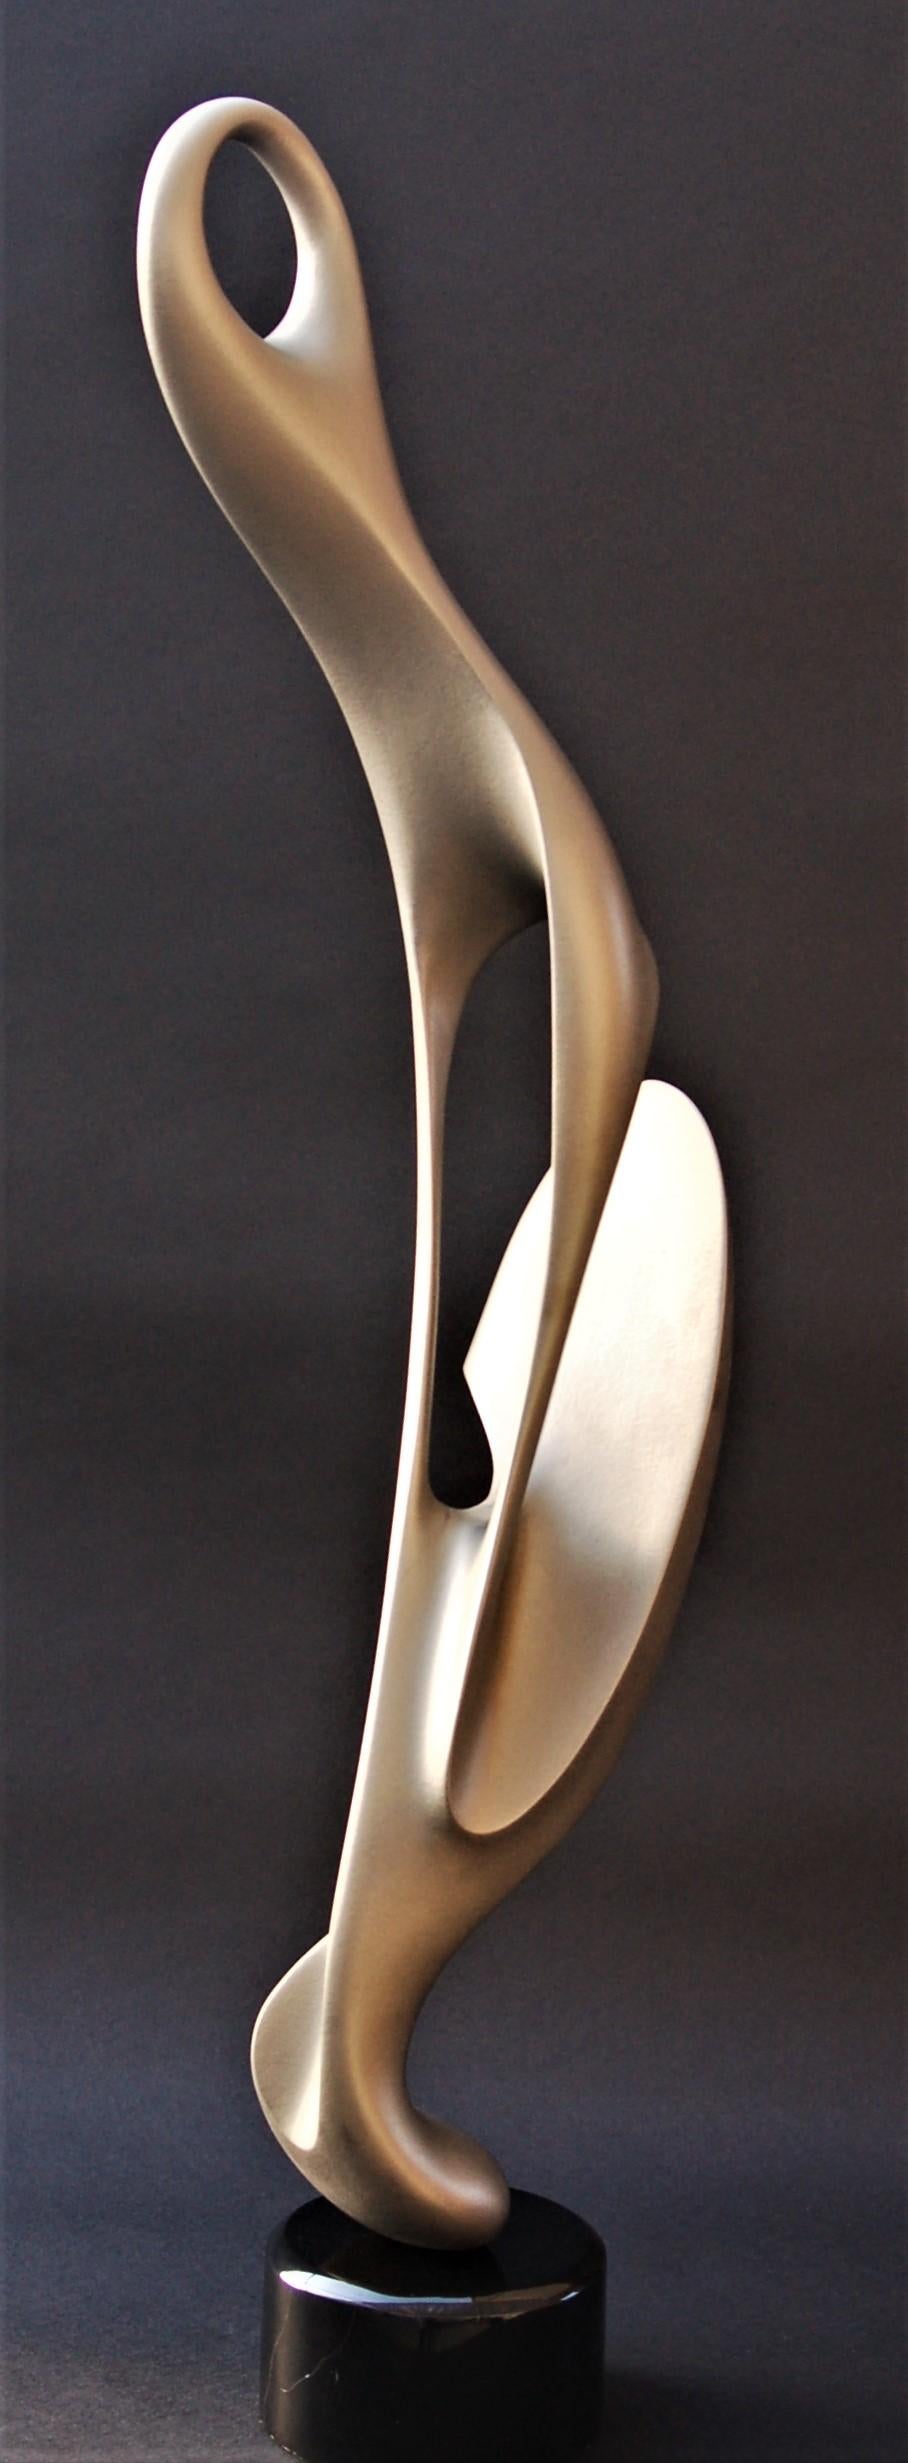 Meditative - Sculpture by Don Frost